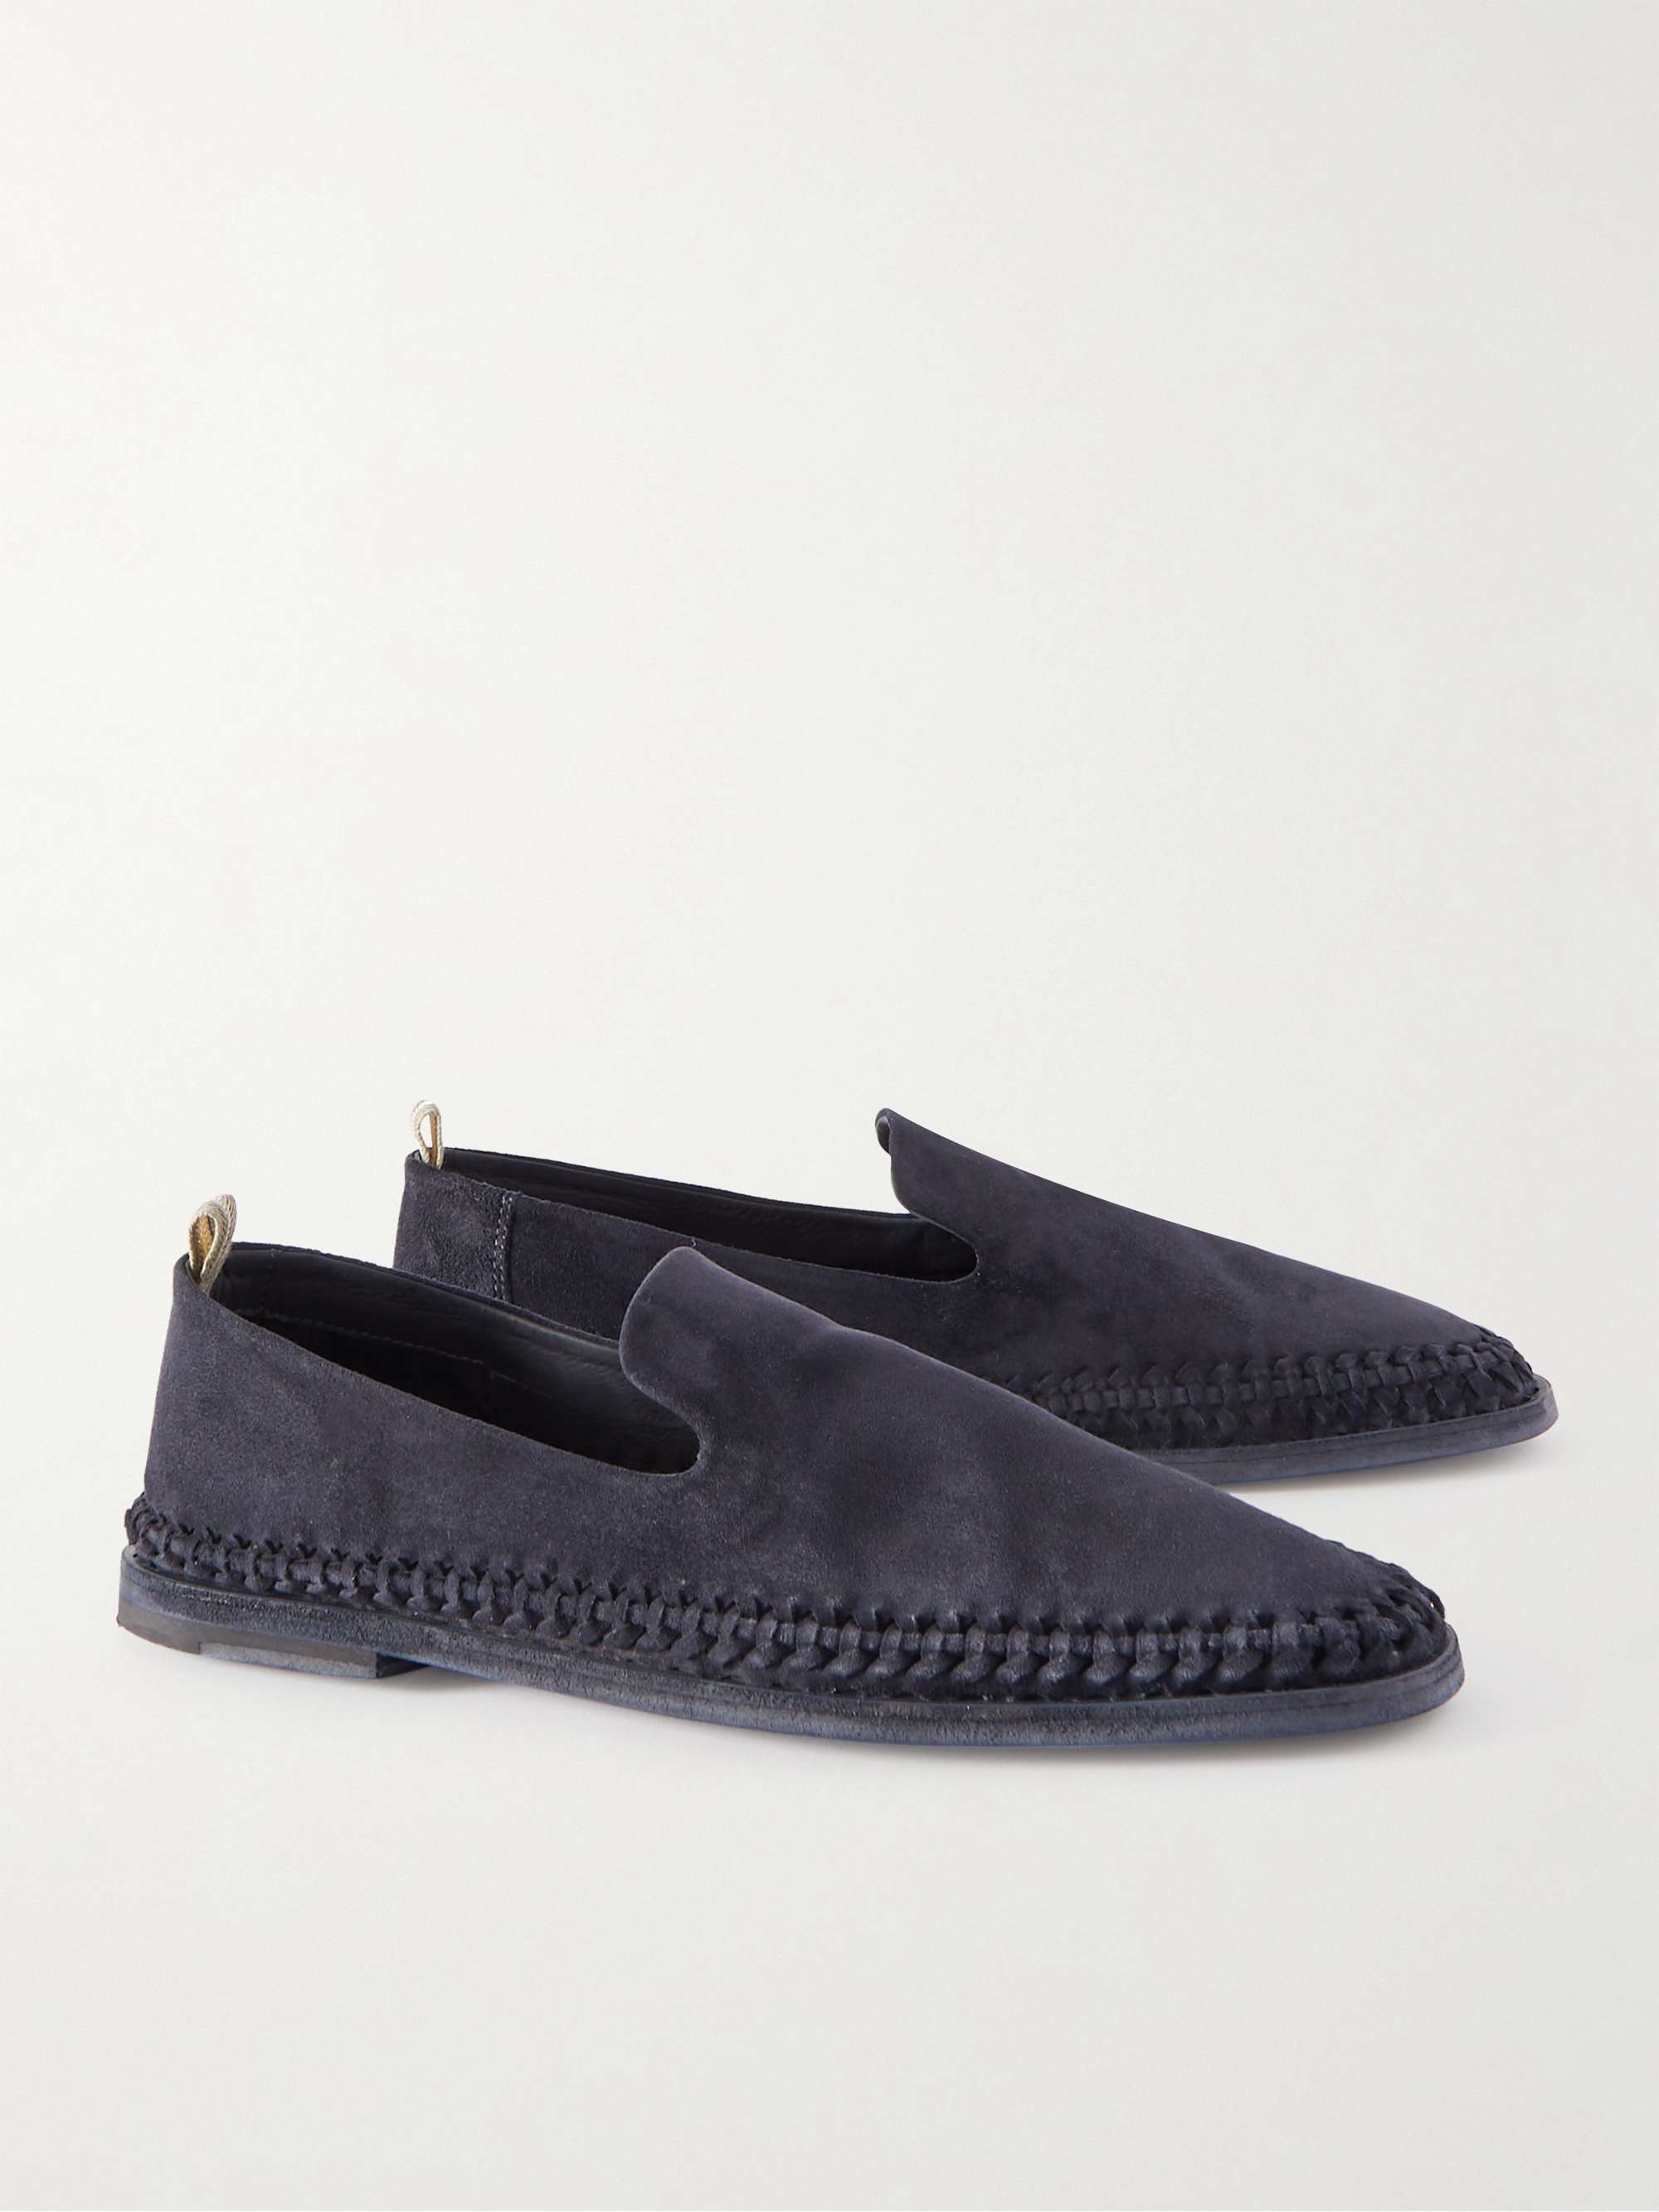 Officine Creative Miles Braided Suede Loafers in Blue for Men Mens Shoes Slip-on shoes Loafers 